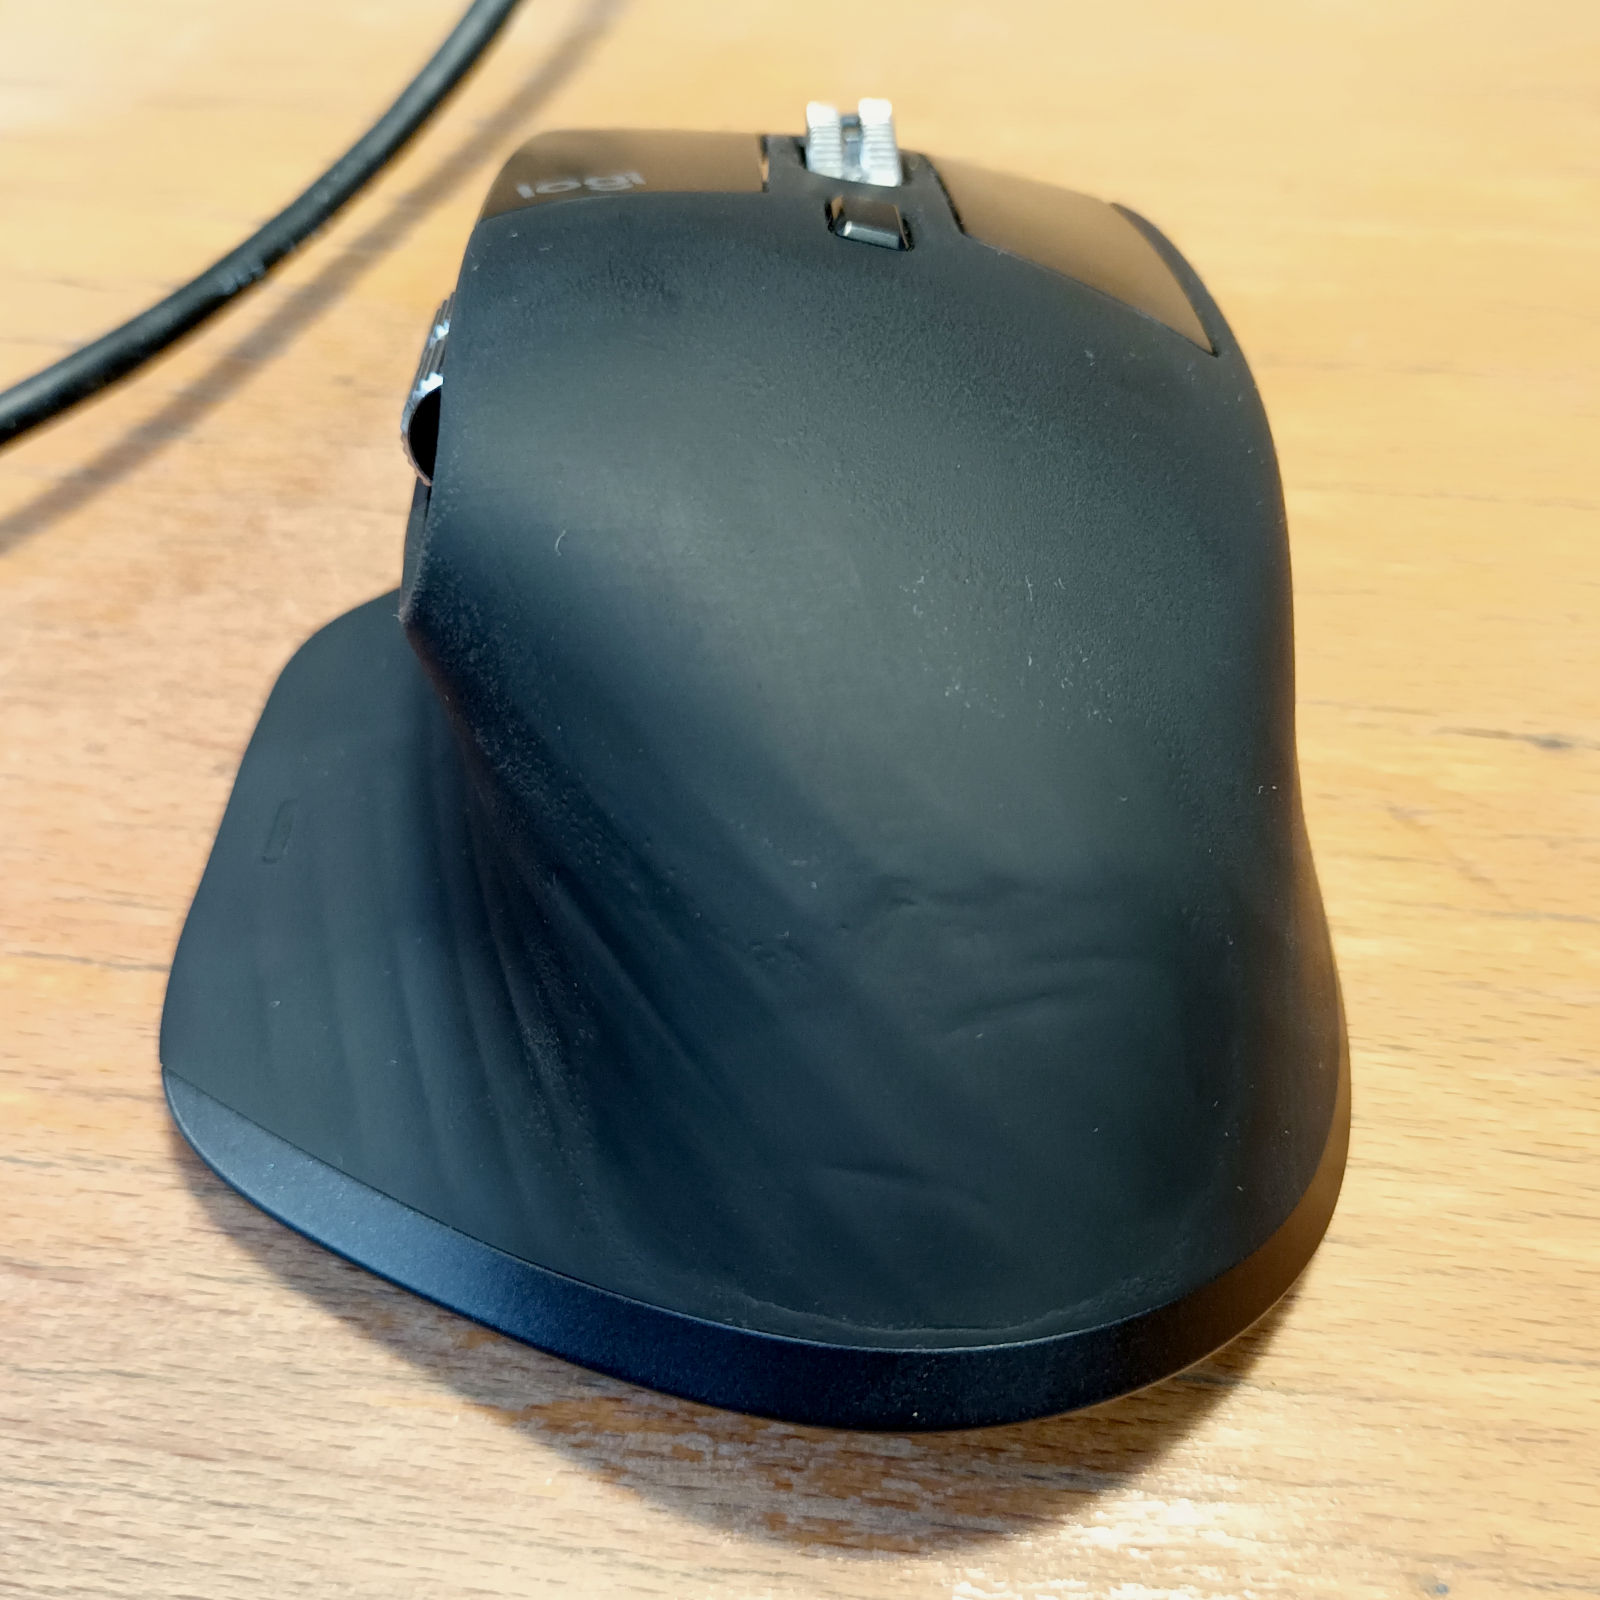 Logitech MX Master 3 mouse (black) with scratches but no peeling rubber on the back. The area where the back contacts with the palm was abraded away.